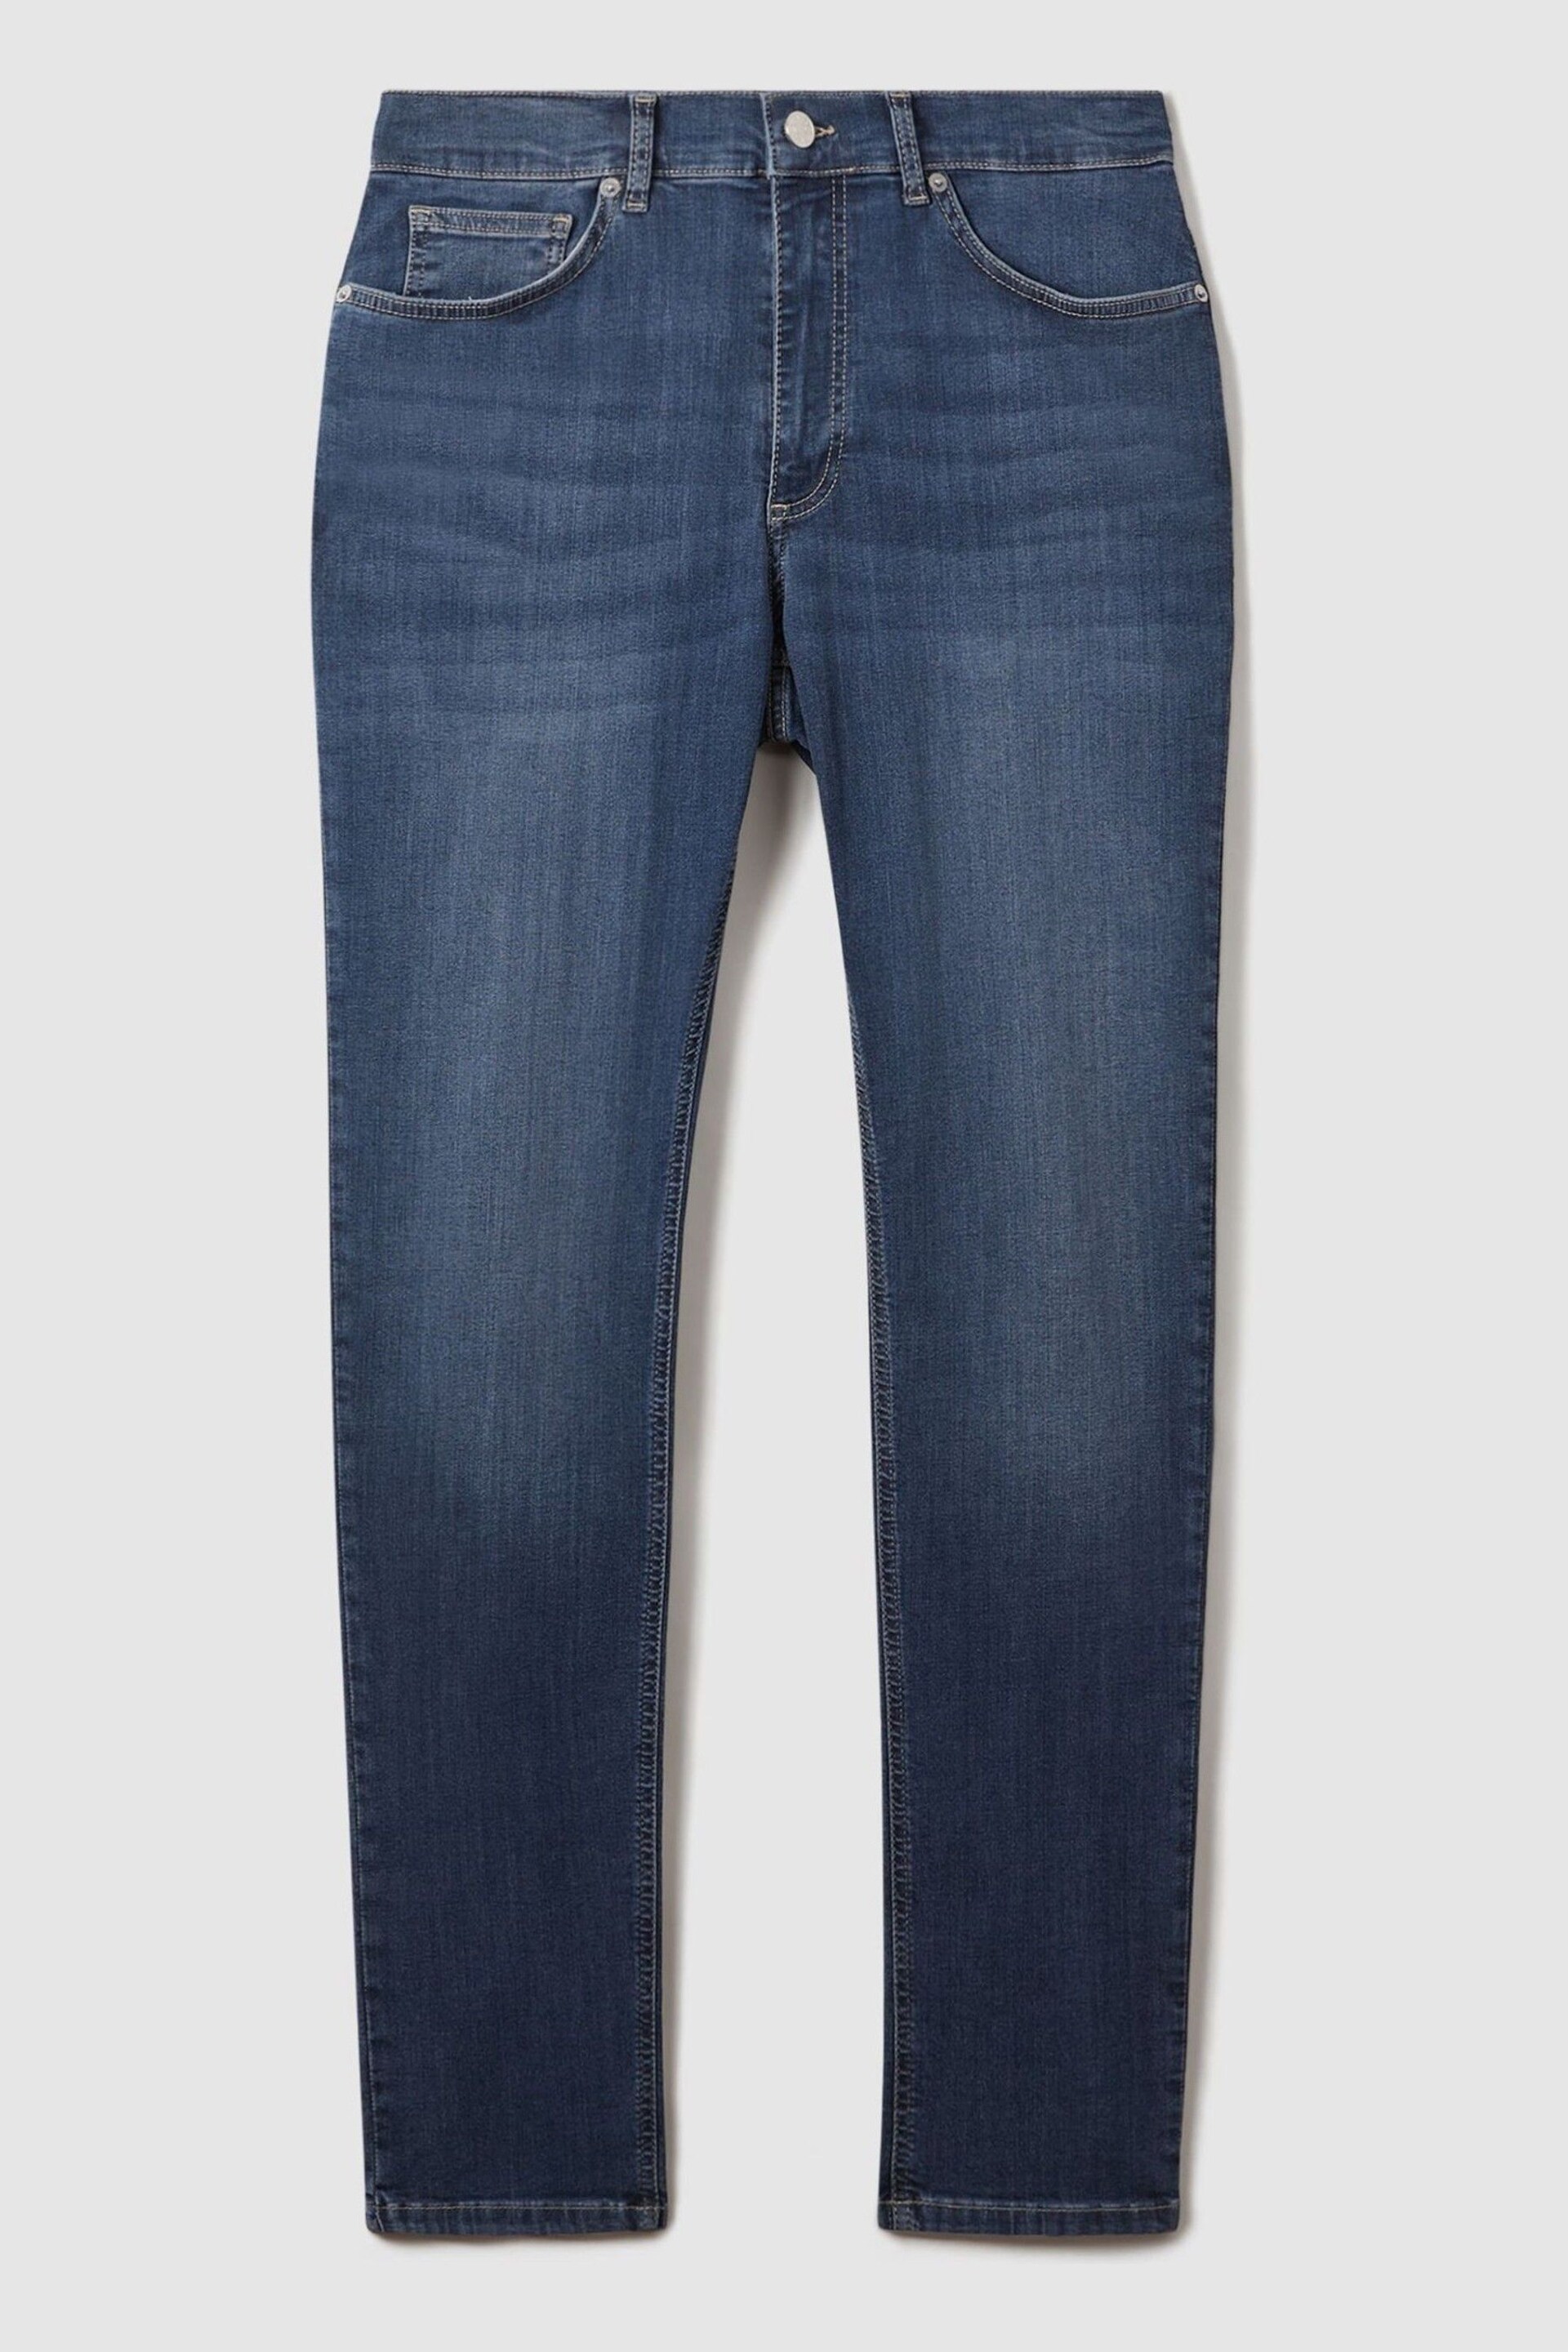 Reiss Indigo James Slim Fit Washed Jersey Jeans - Image 2 of 6